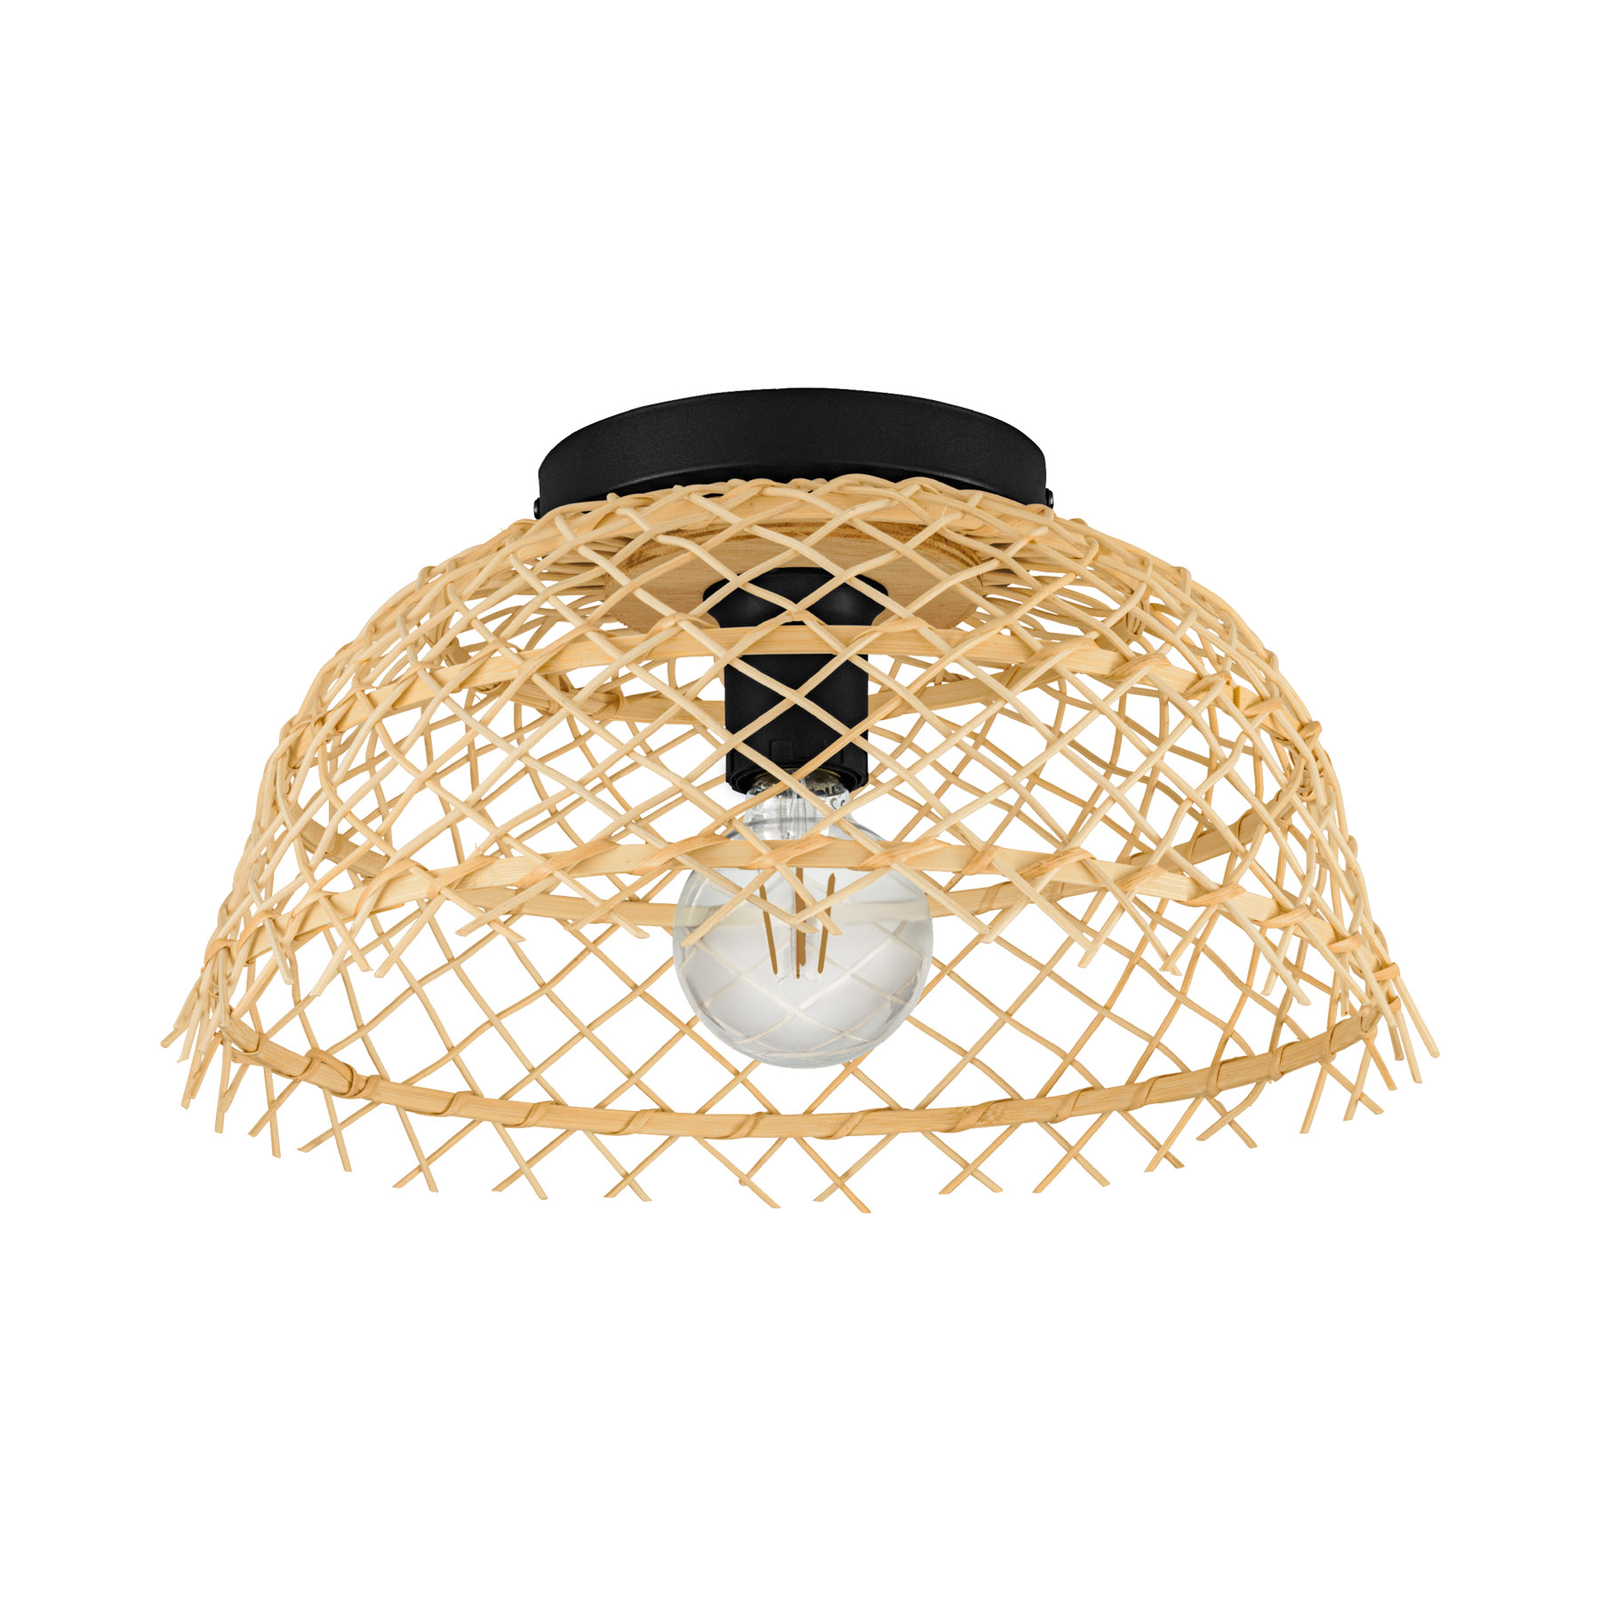 Ausnby ceiling light wooden meshwork, natural